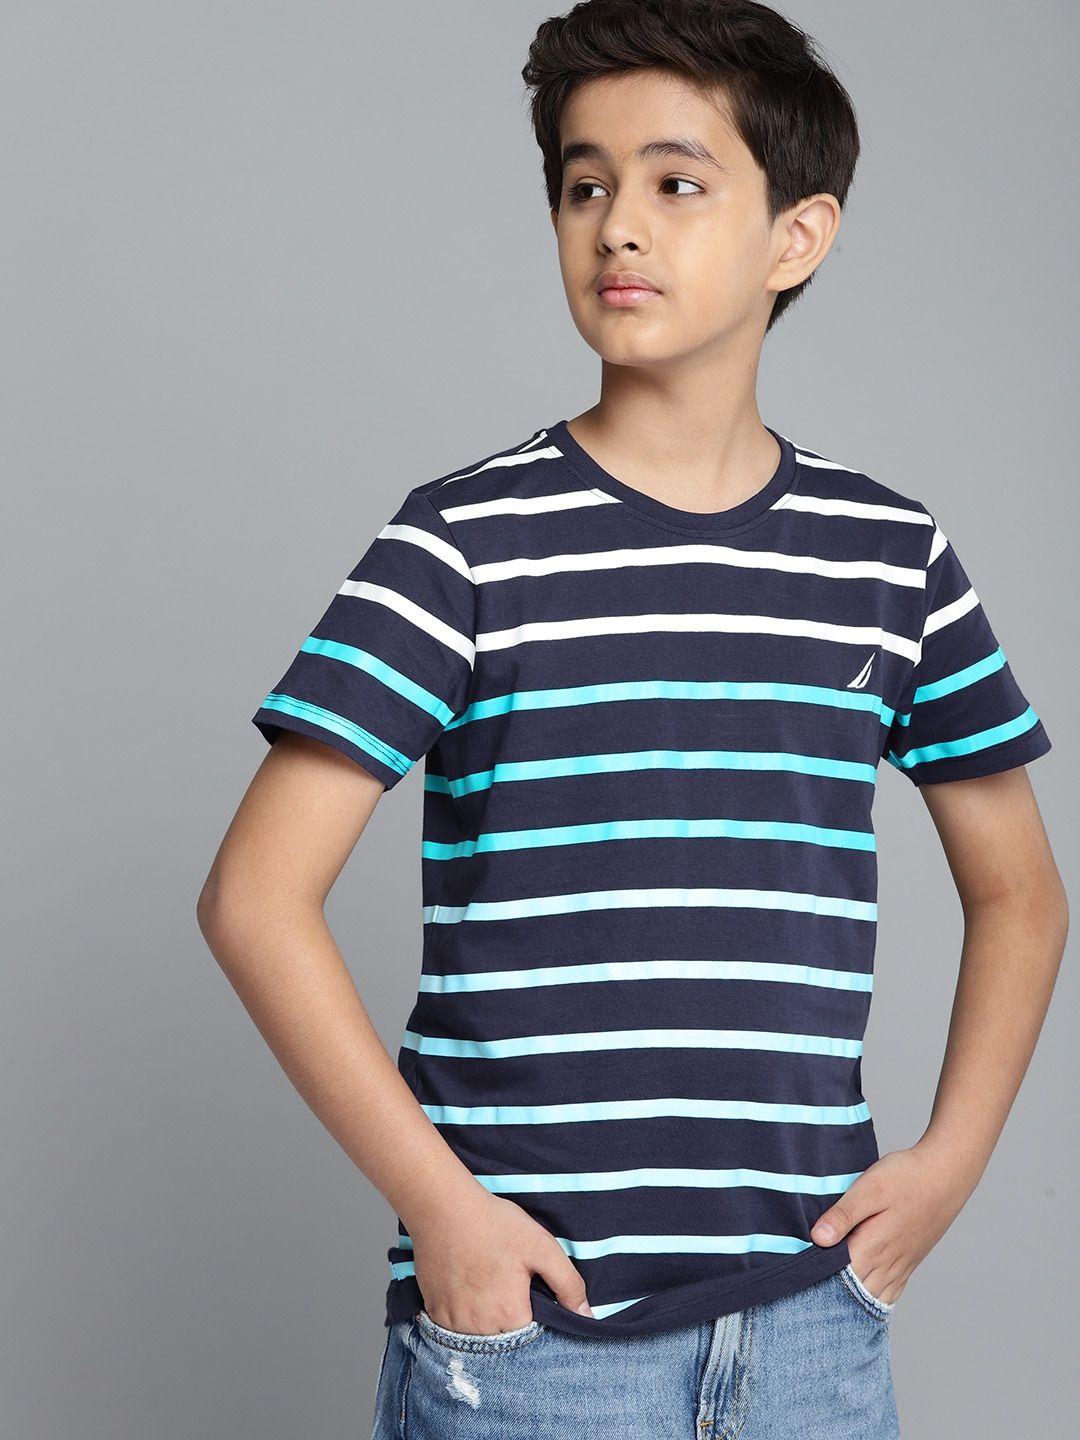 nautica boys navy blue striped round neck embroidered pure cotton t-shirt